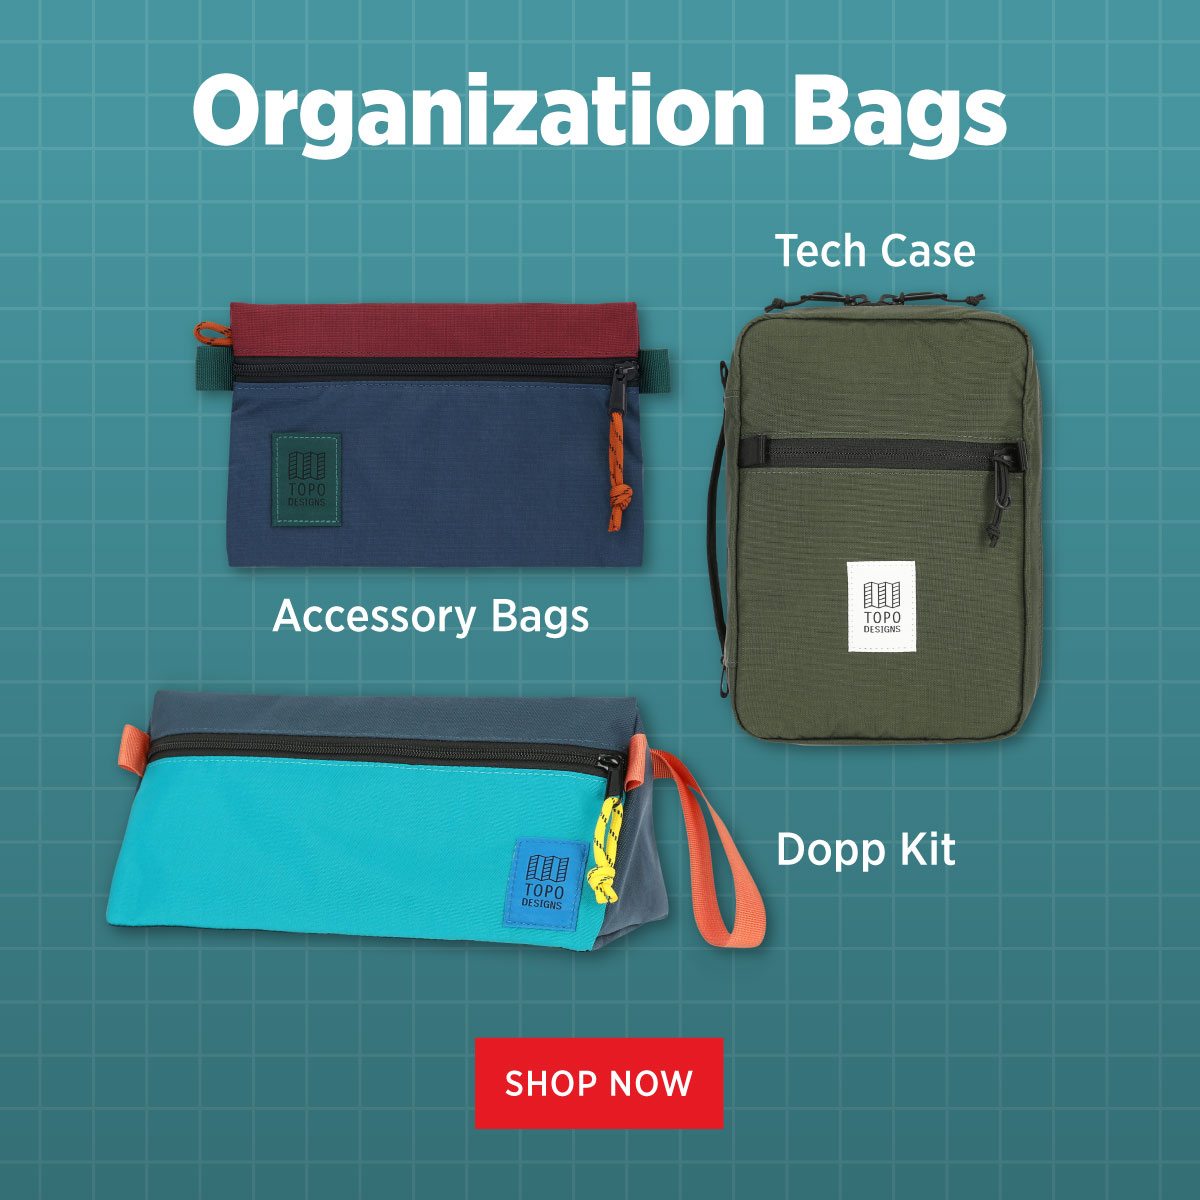 ORGANIZATION BAGS - ACCESSORY BAGS, TECH CASE, AND DOPP KIT